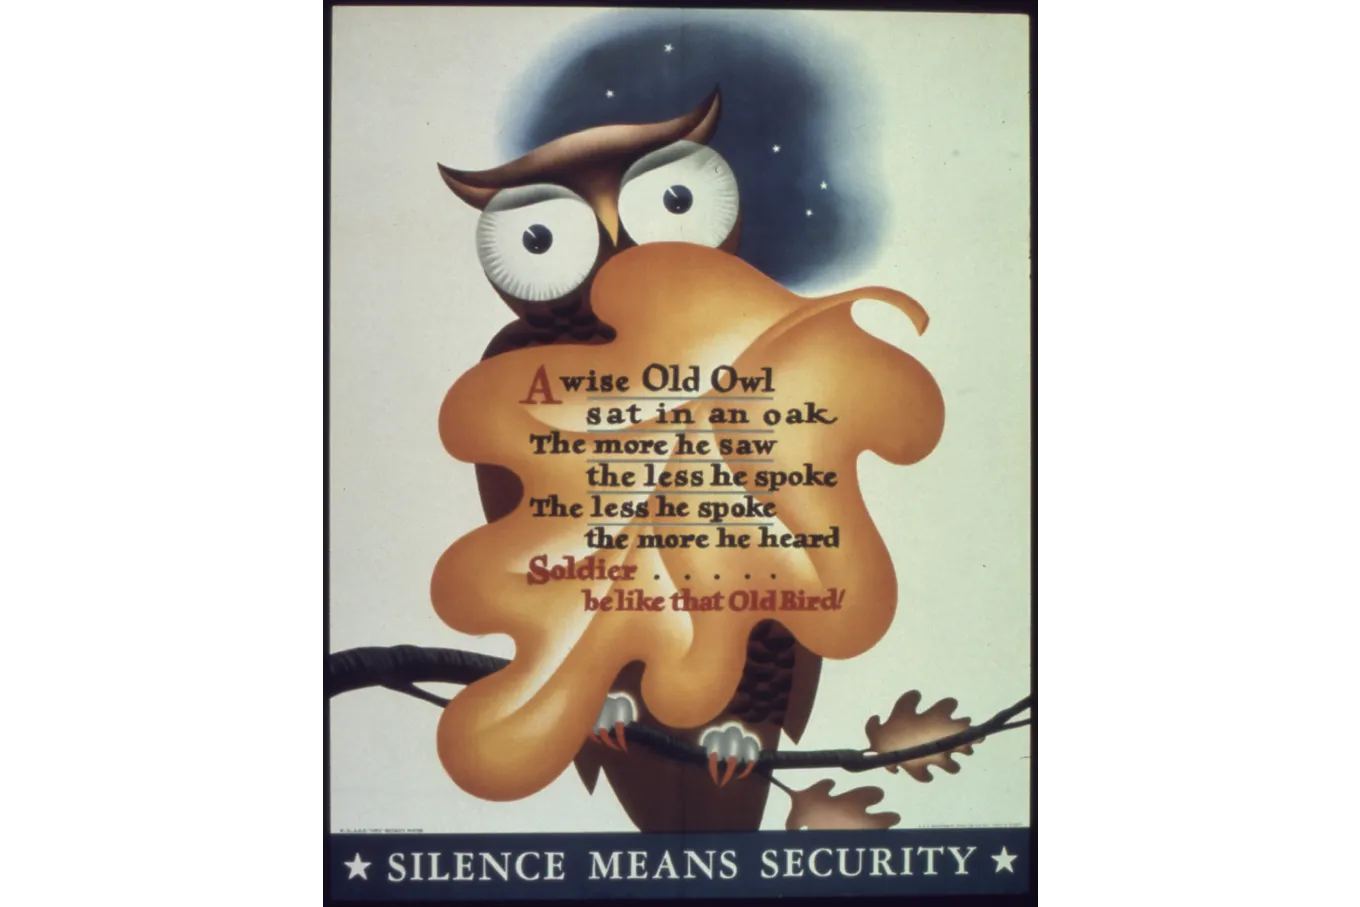 Owl behind a leaf with the phrase "A Wise Old Owl sat in an oak. The more he saw, the less he spoke. The less he spoke, the more he heard. Soldier...be like that old bird." Caption: silence means security